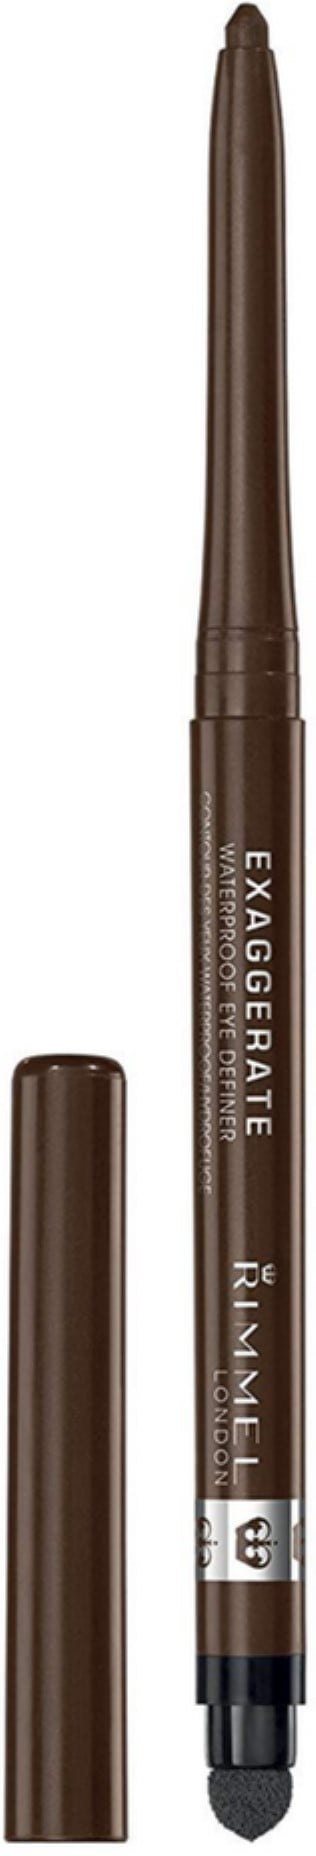 Rimmel Exaggerate Eye Definer, Rich Brown .01 oz (Pack of 2) -